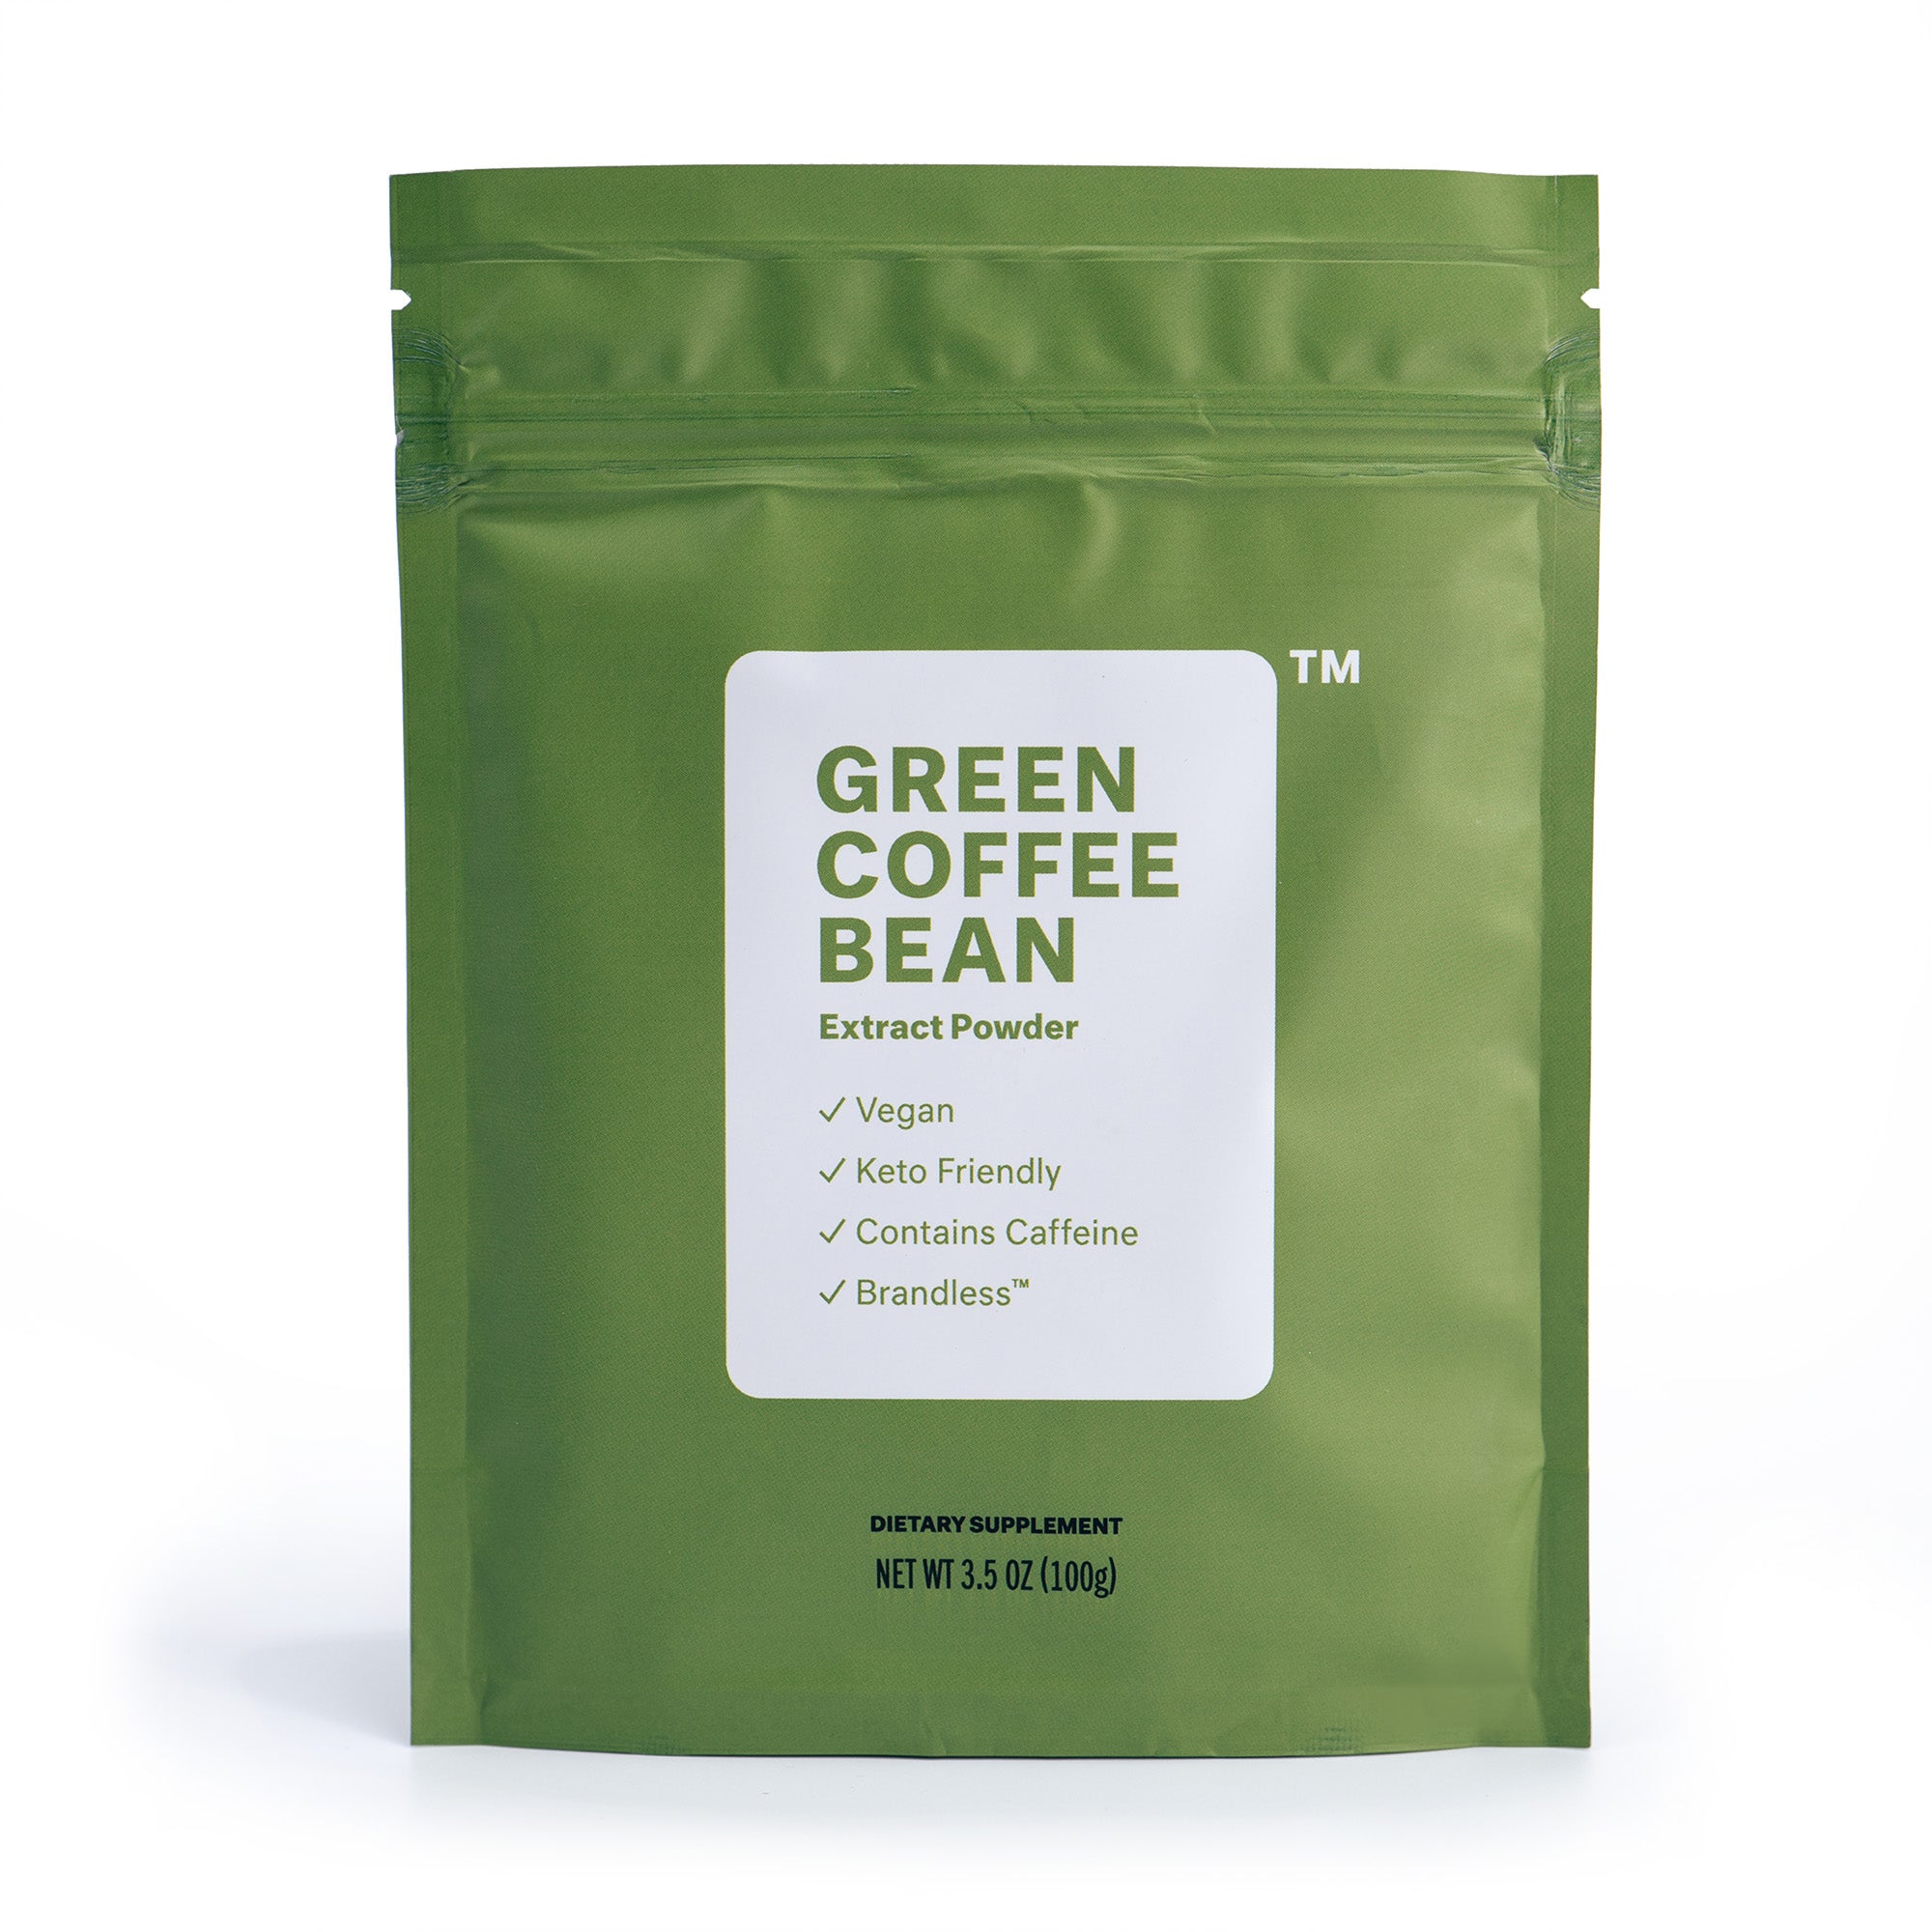 Green Coffee Bean Extract Powder, product photo of bag with bowl of green powder in foreground.  Vegan, keto friendly, contains caffeine, brandless.  Dietary supplement, net. wt. 3.5oz (100g).